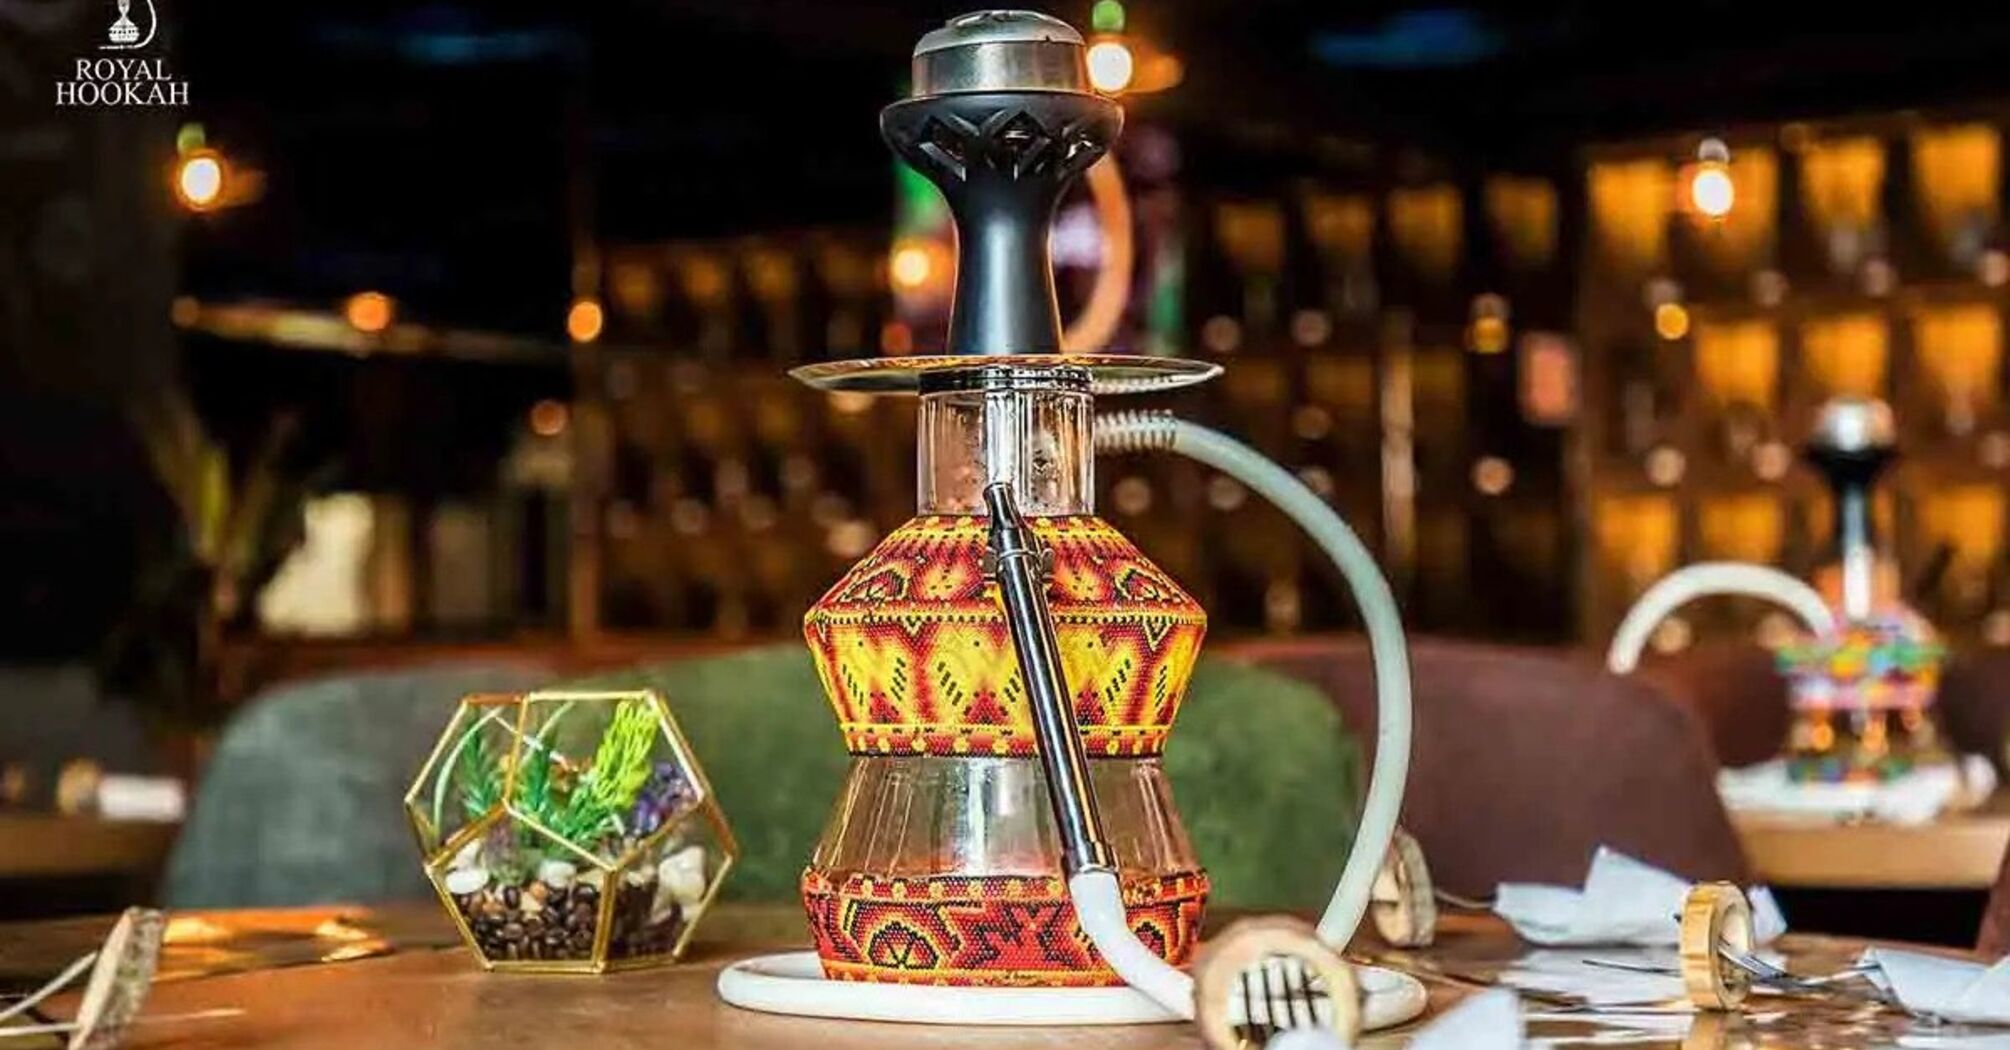 Advantages and disadvantages of working as a hookah maker